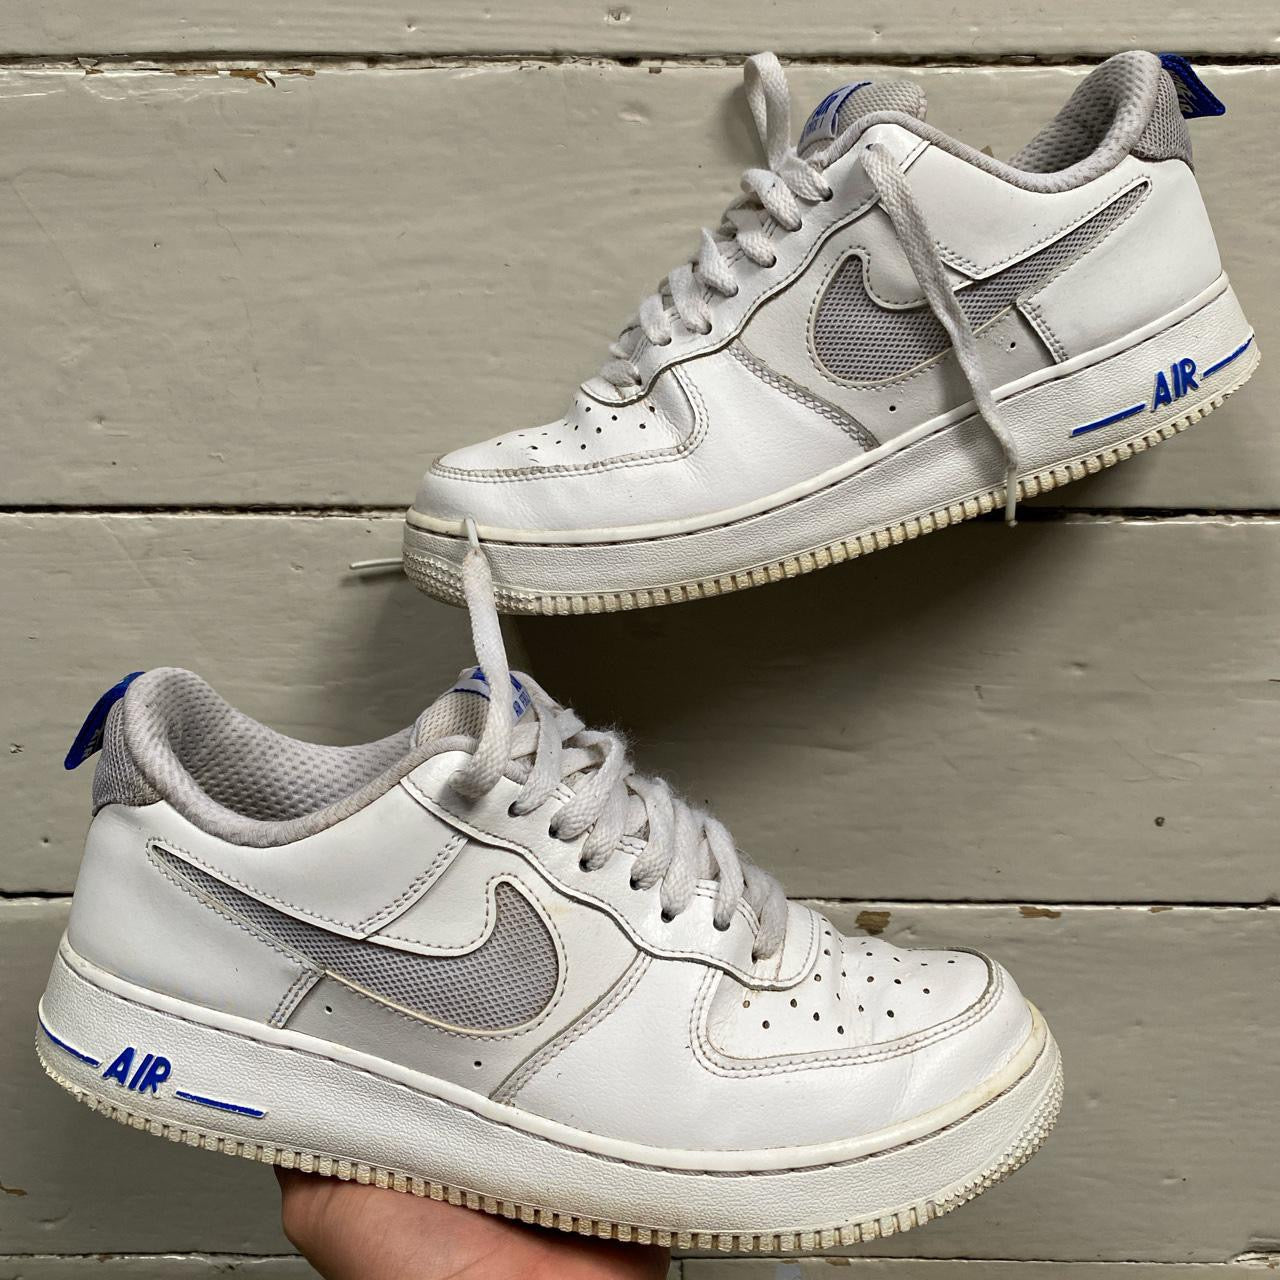 Nike Air Force 1 White and Blue (UK 8)